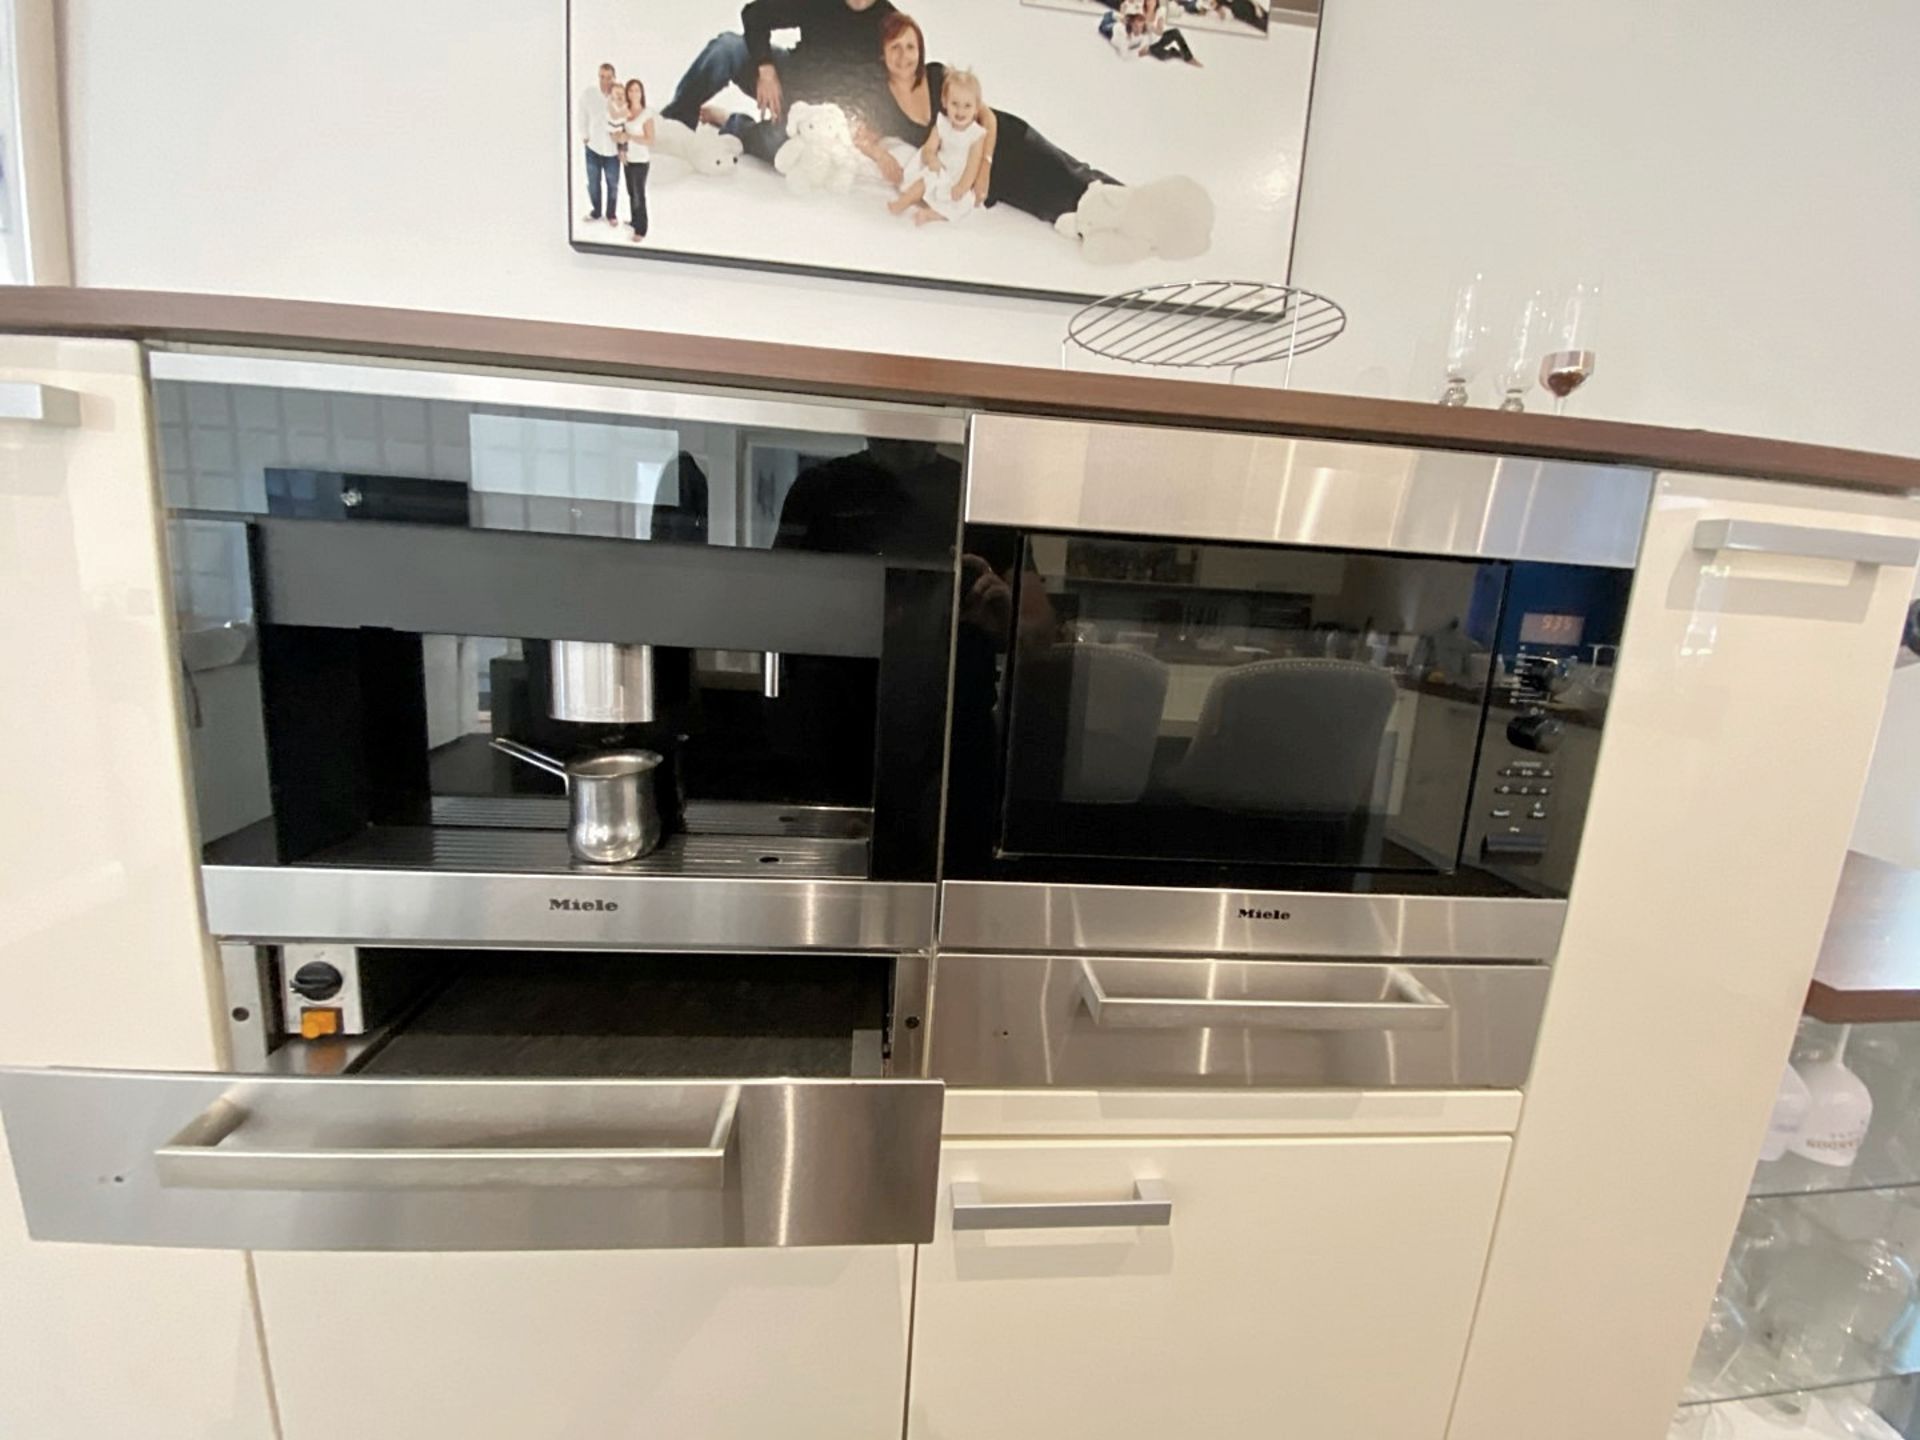 1 x Bespoke Luxury ALNO Branded Fitted Kitchen With Miele Appliances And Silestone® Central Island - Image 10 of 10